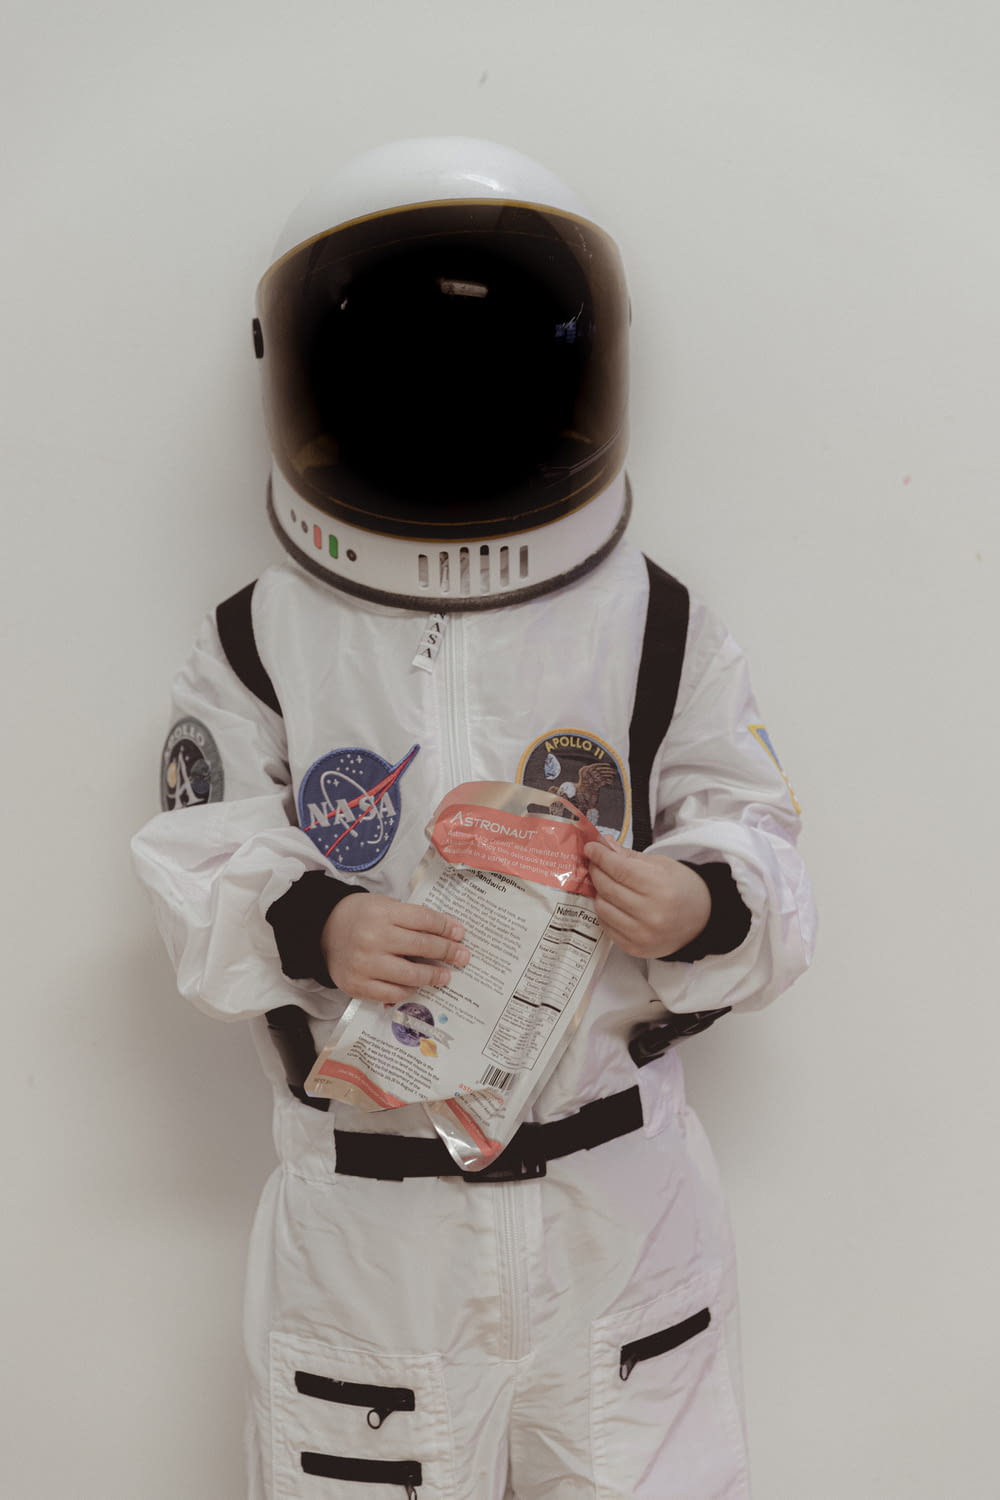 a man in a space suit holding a newspaper